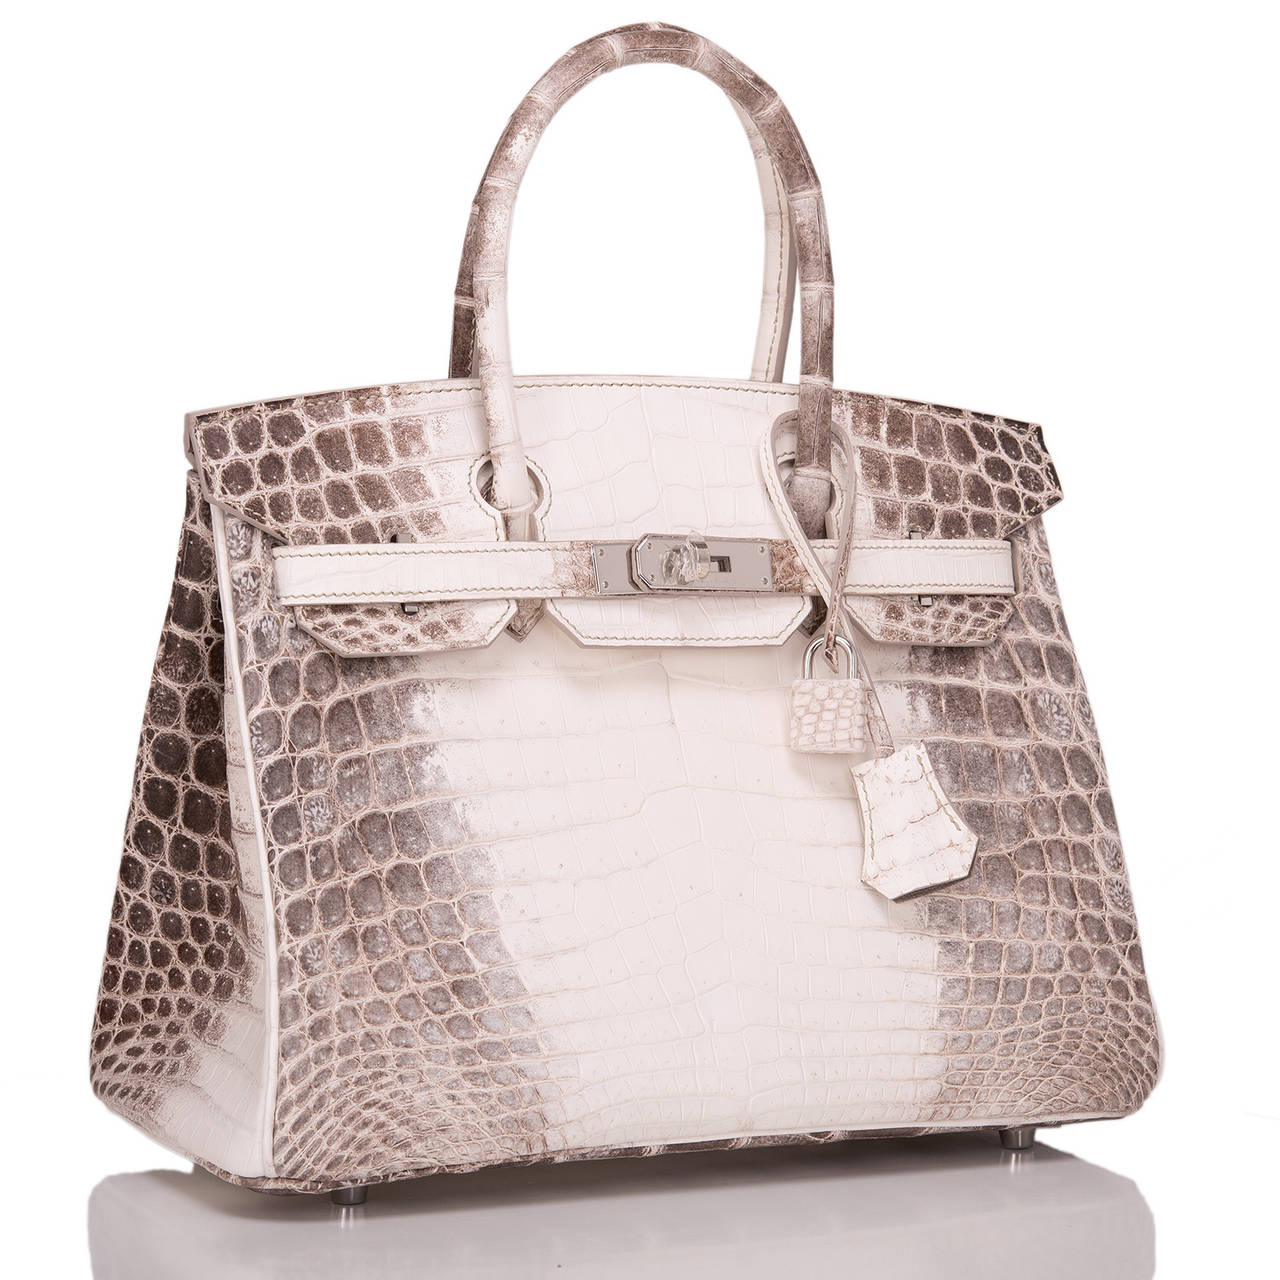 Hermes Himalayan 30cm Birkin in White matte niloticus crocodile skin with palladium hardware.

This rare Himalayan features tonal stitching, front toggle closure, clochette with lock and two keys, and double rolled handles. The interior is lined